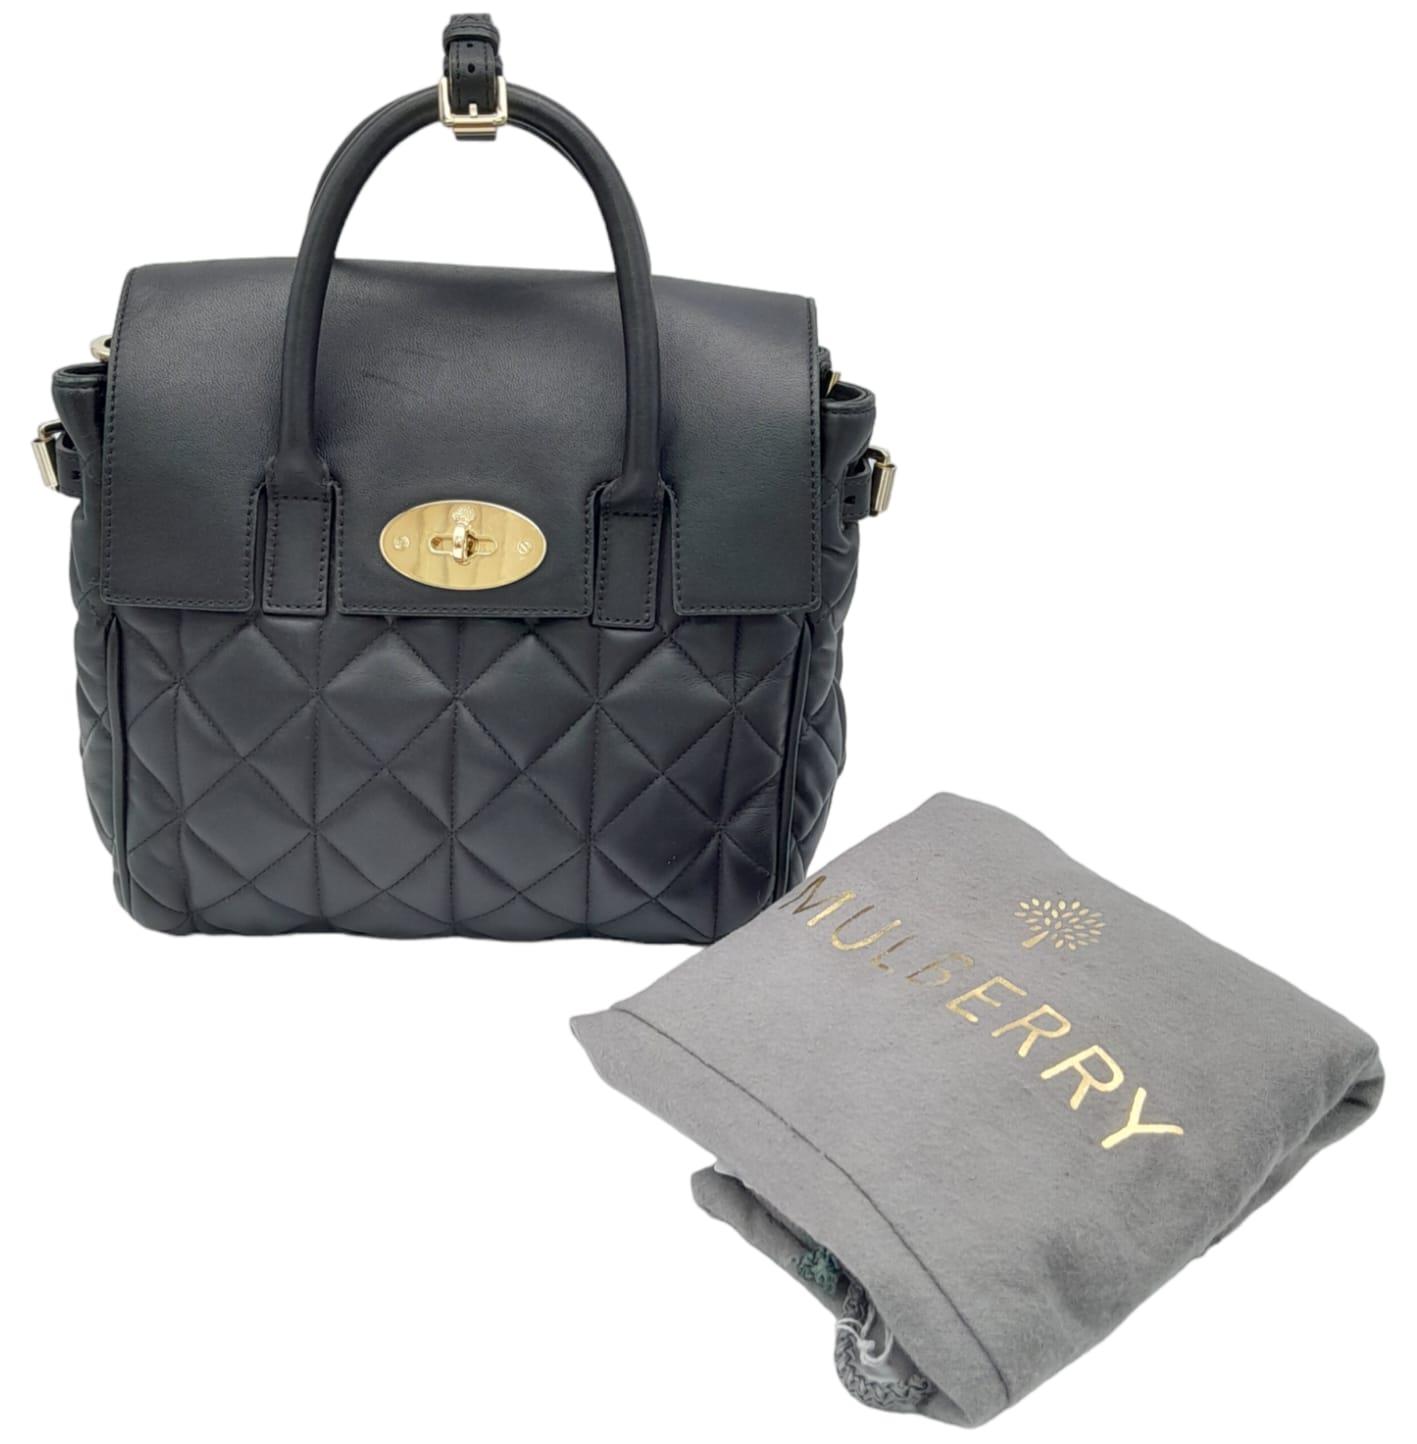 Mulberry Black Quilted Leather Cara Delevingne Convertible Bag. Versatile in design, it comes with